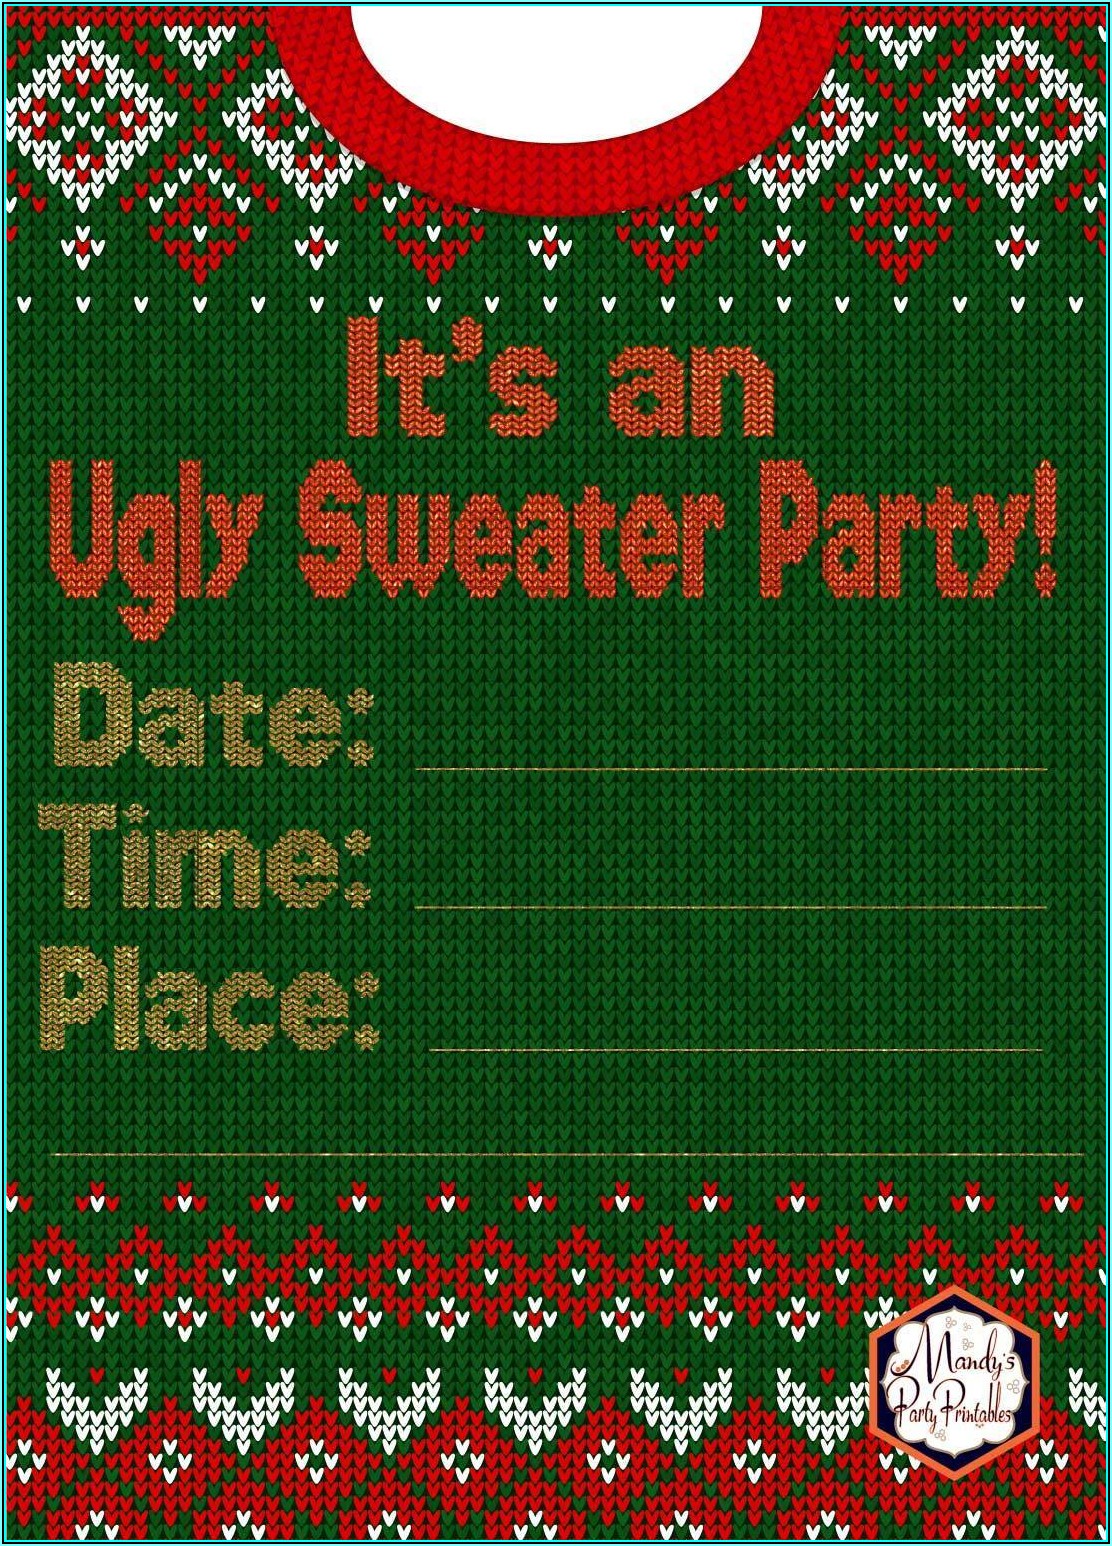 Ugly Sweater Party Invite Template Free